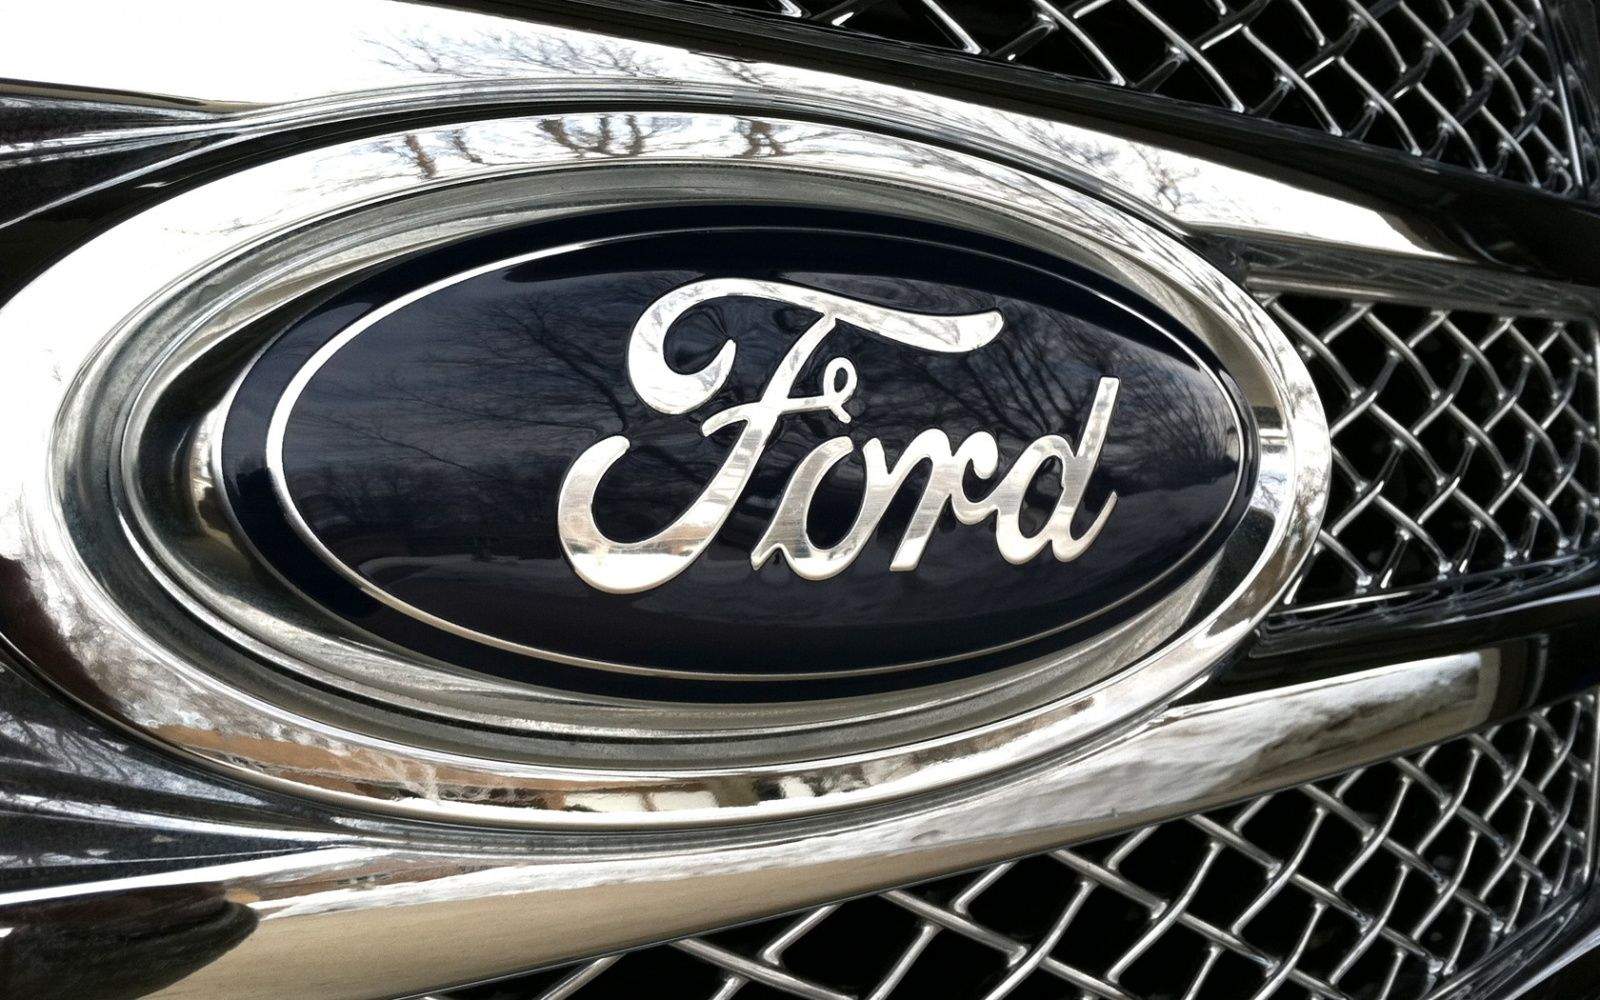 Siri Eyes Free is coming to 2011 model Fords and earlier.